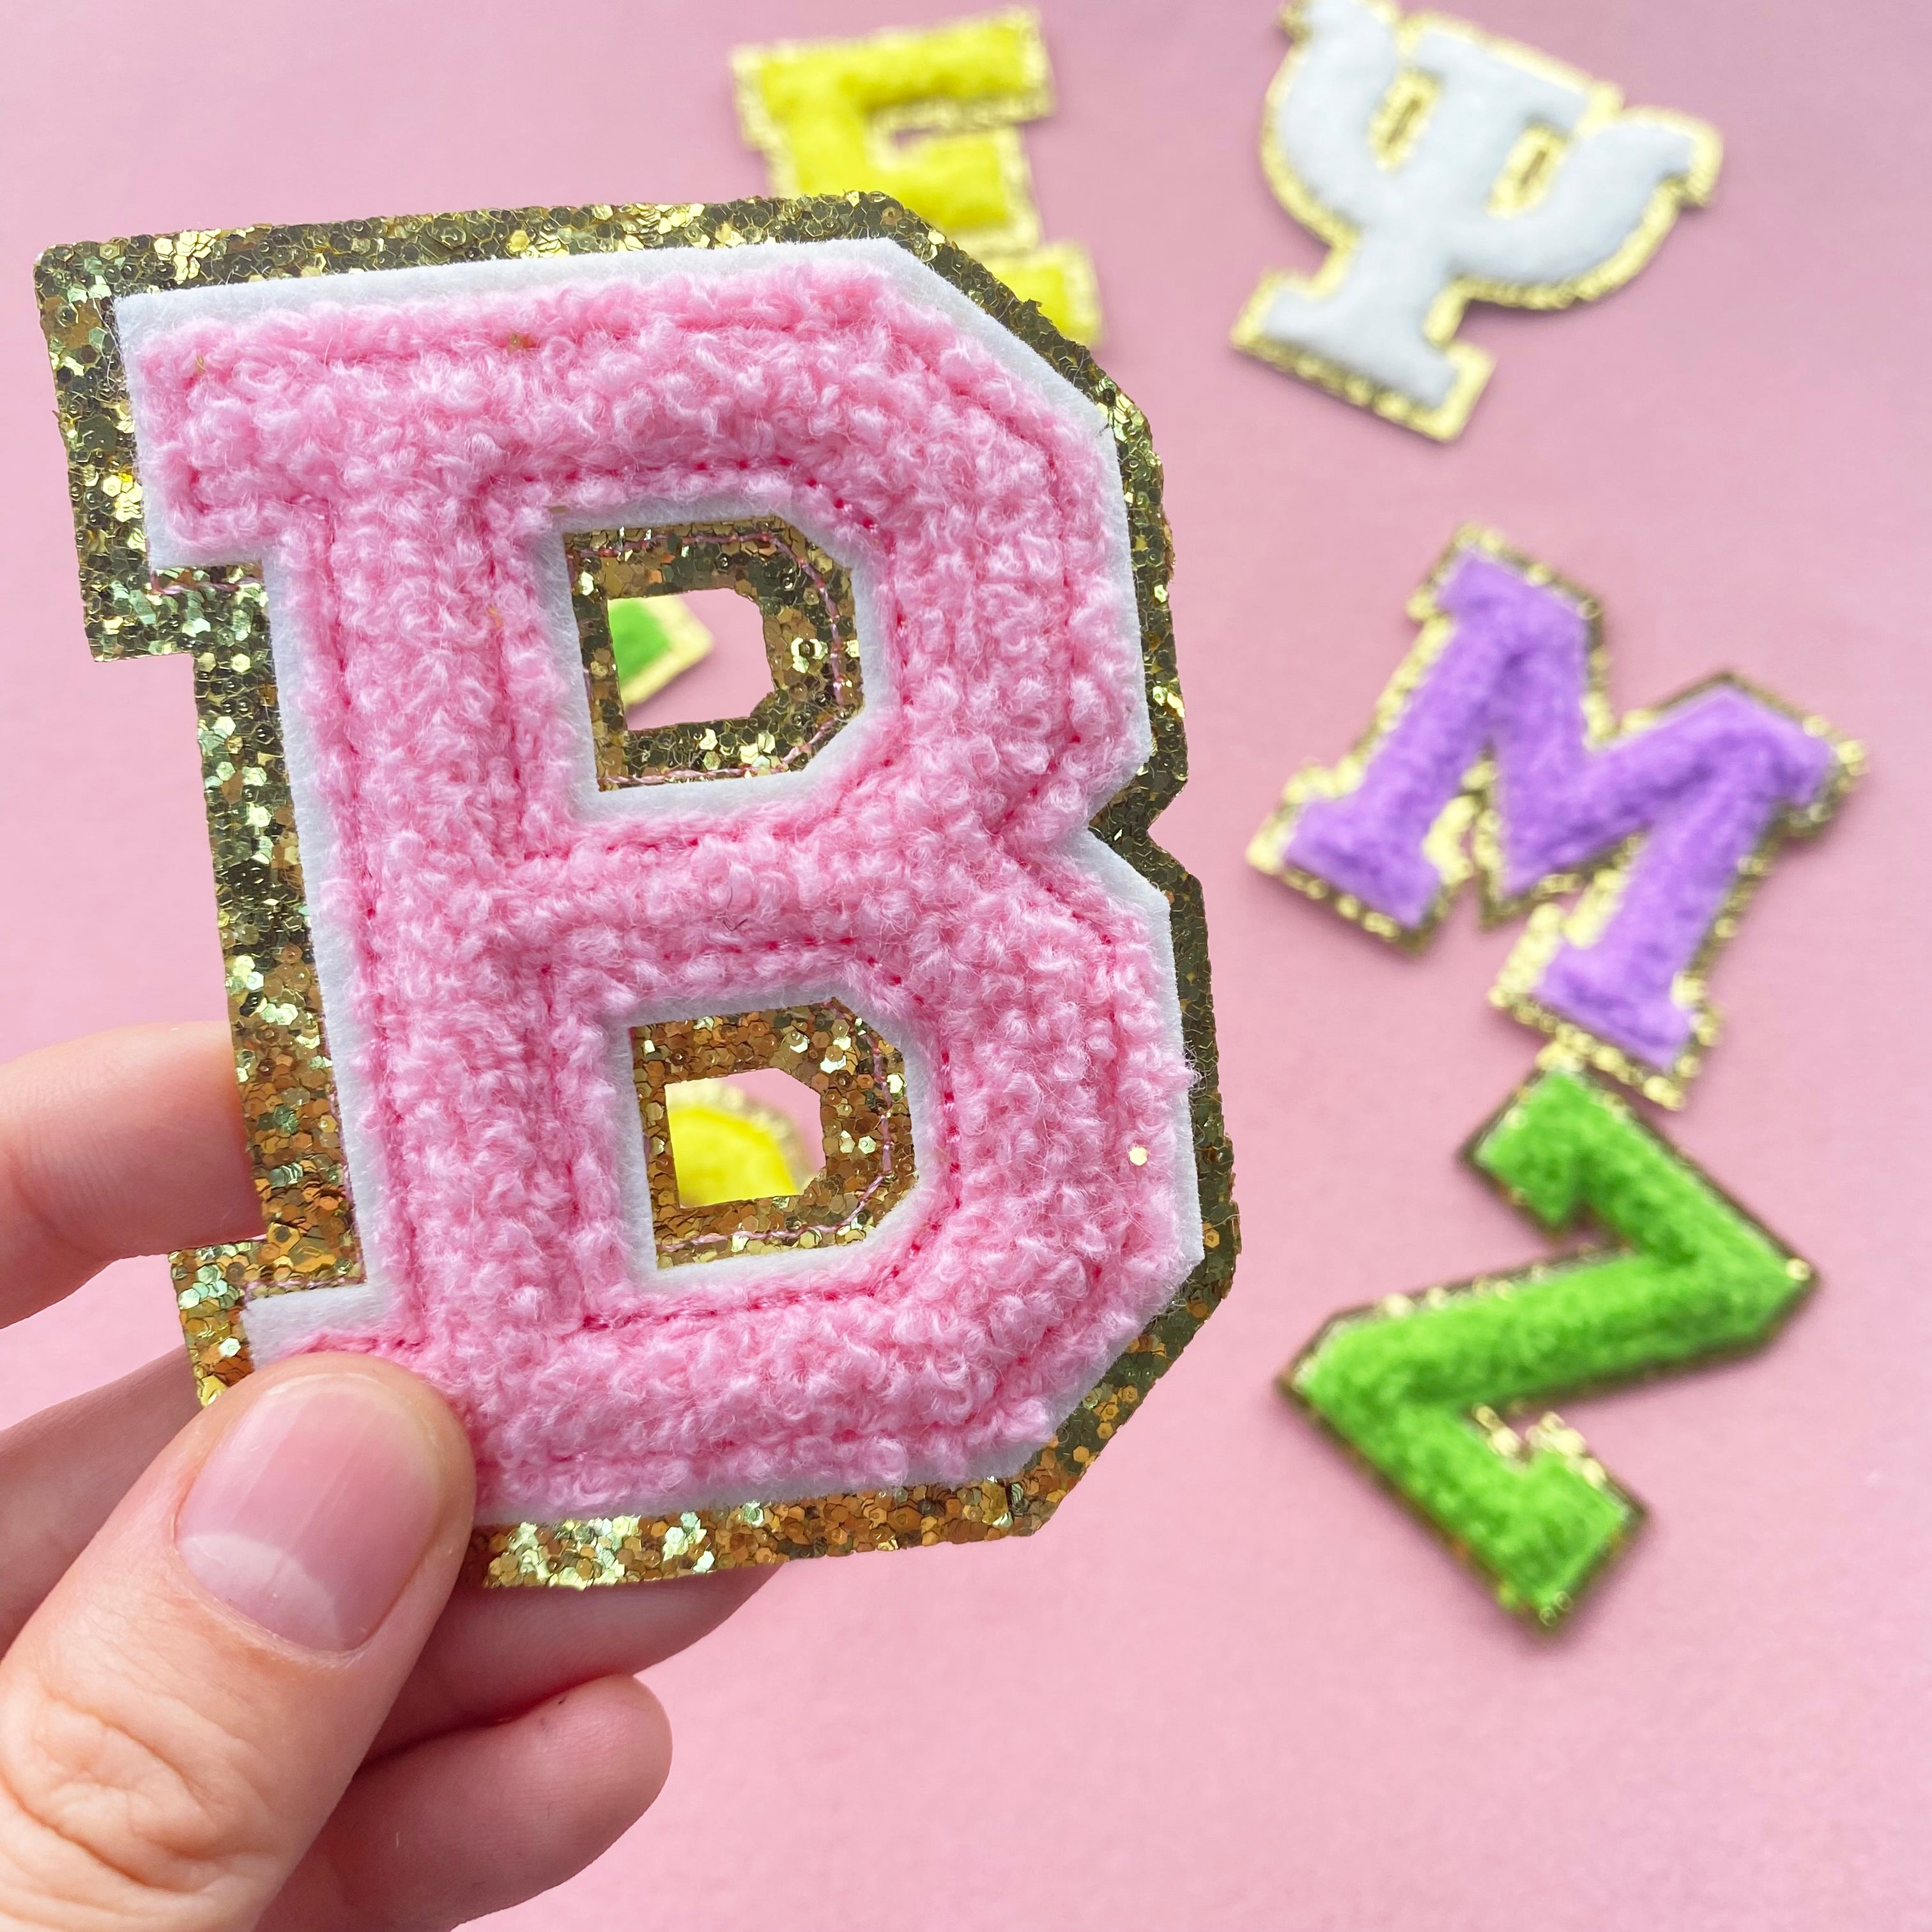 Custom Embroidered Personalized Sparkling Glitter Name Patches - Matching  Set of 2 Name Patch Tags - Iron on or Sew on (2 Patches Total)